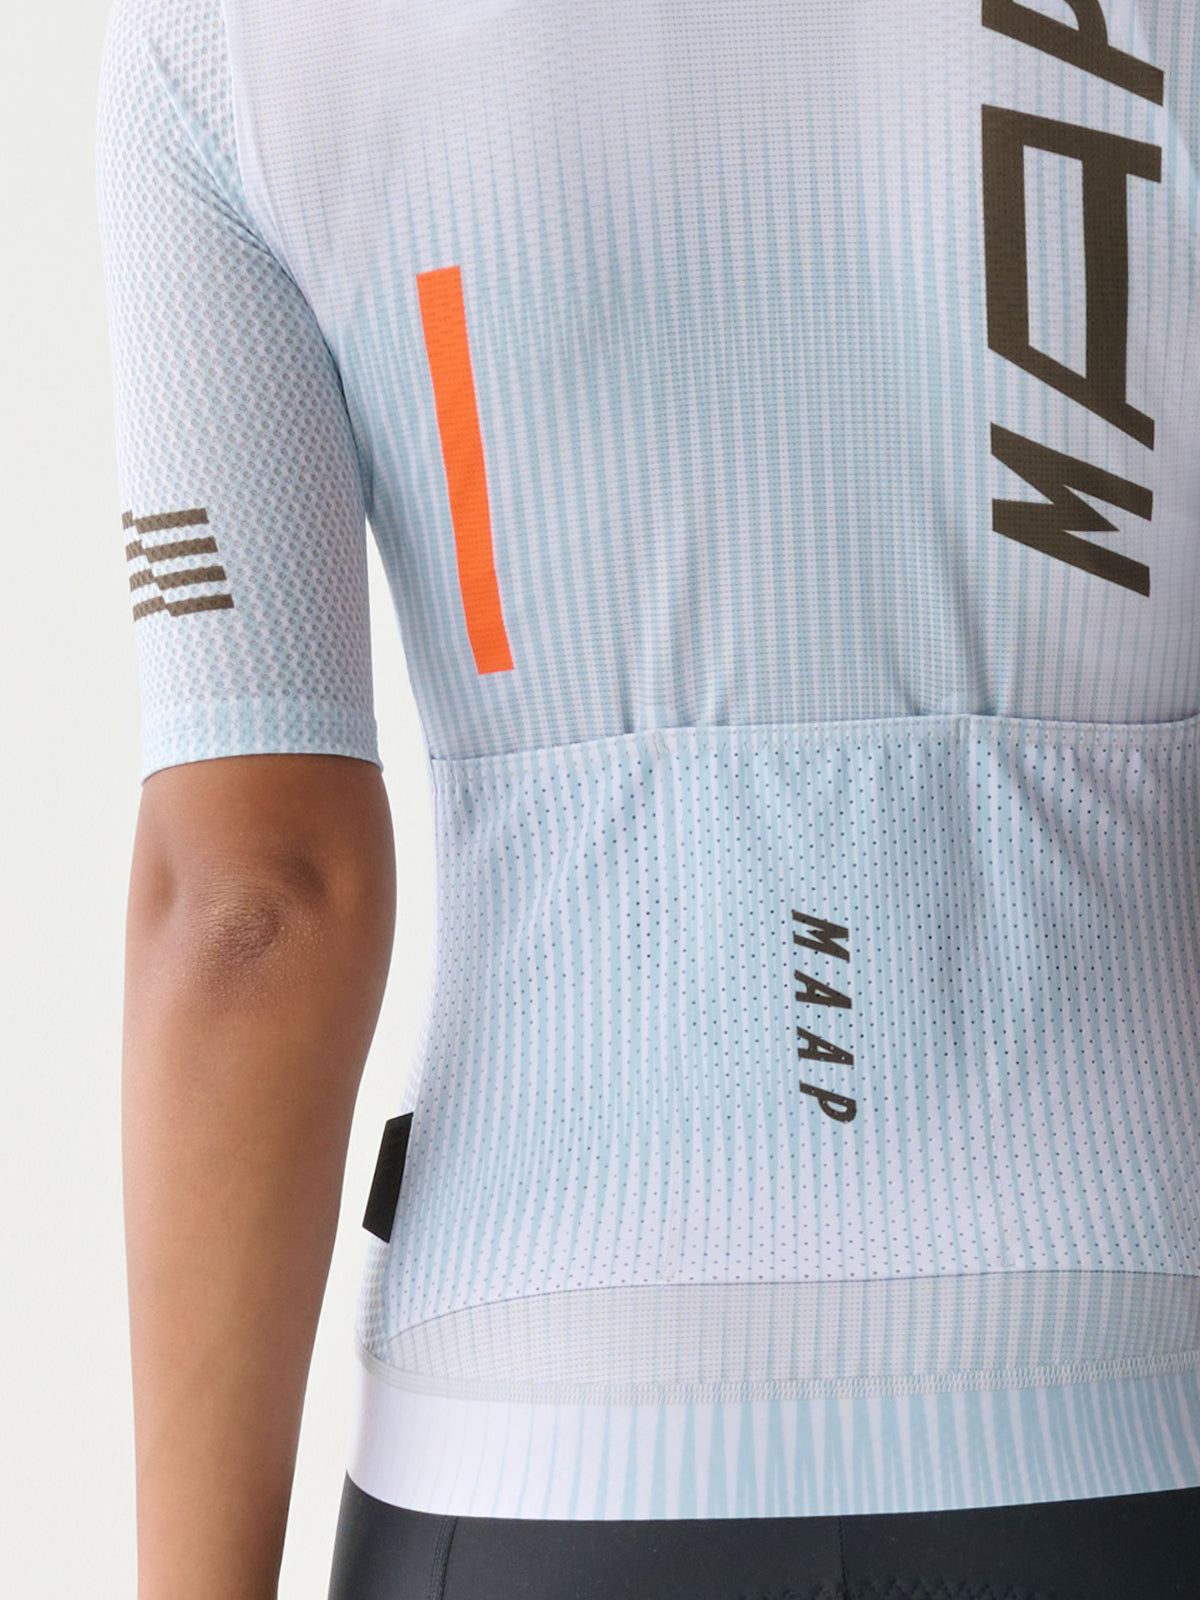 Womens Privateer F.O Pro Jersey